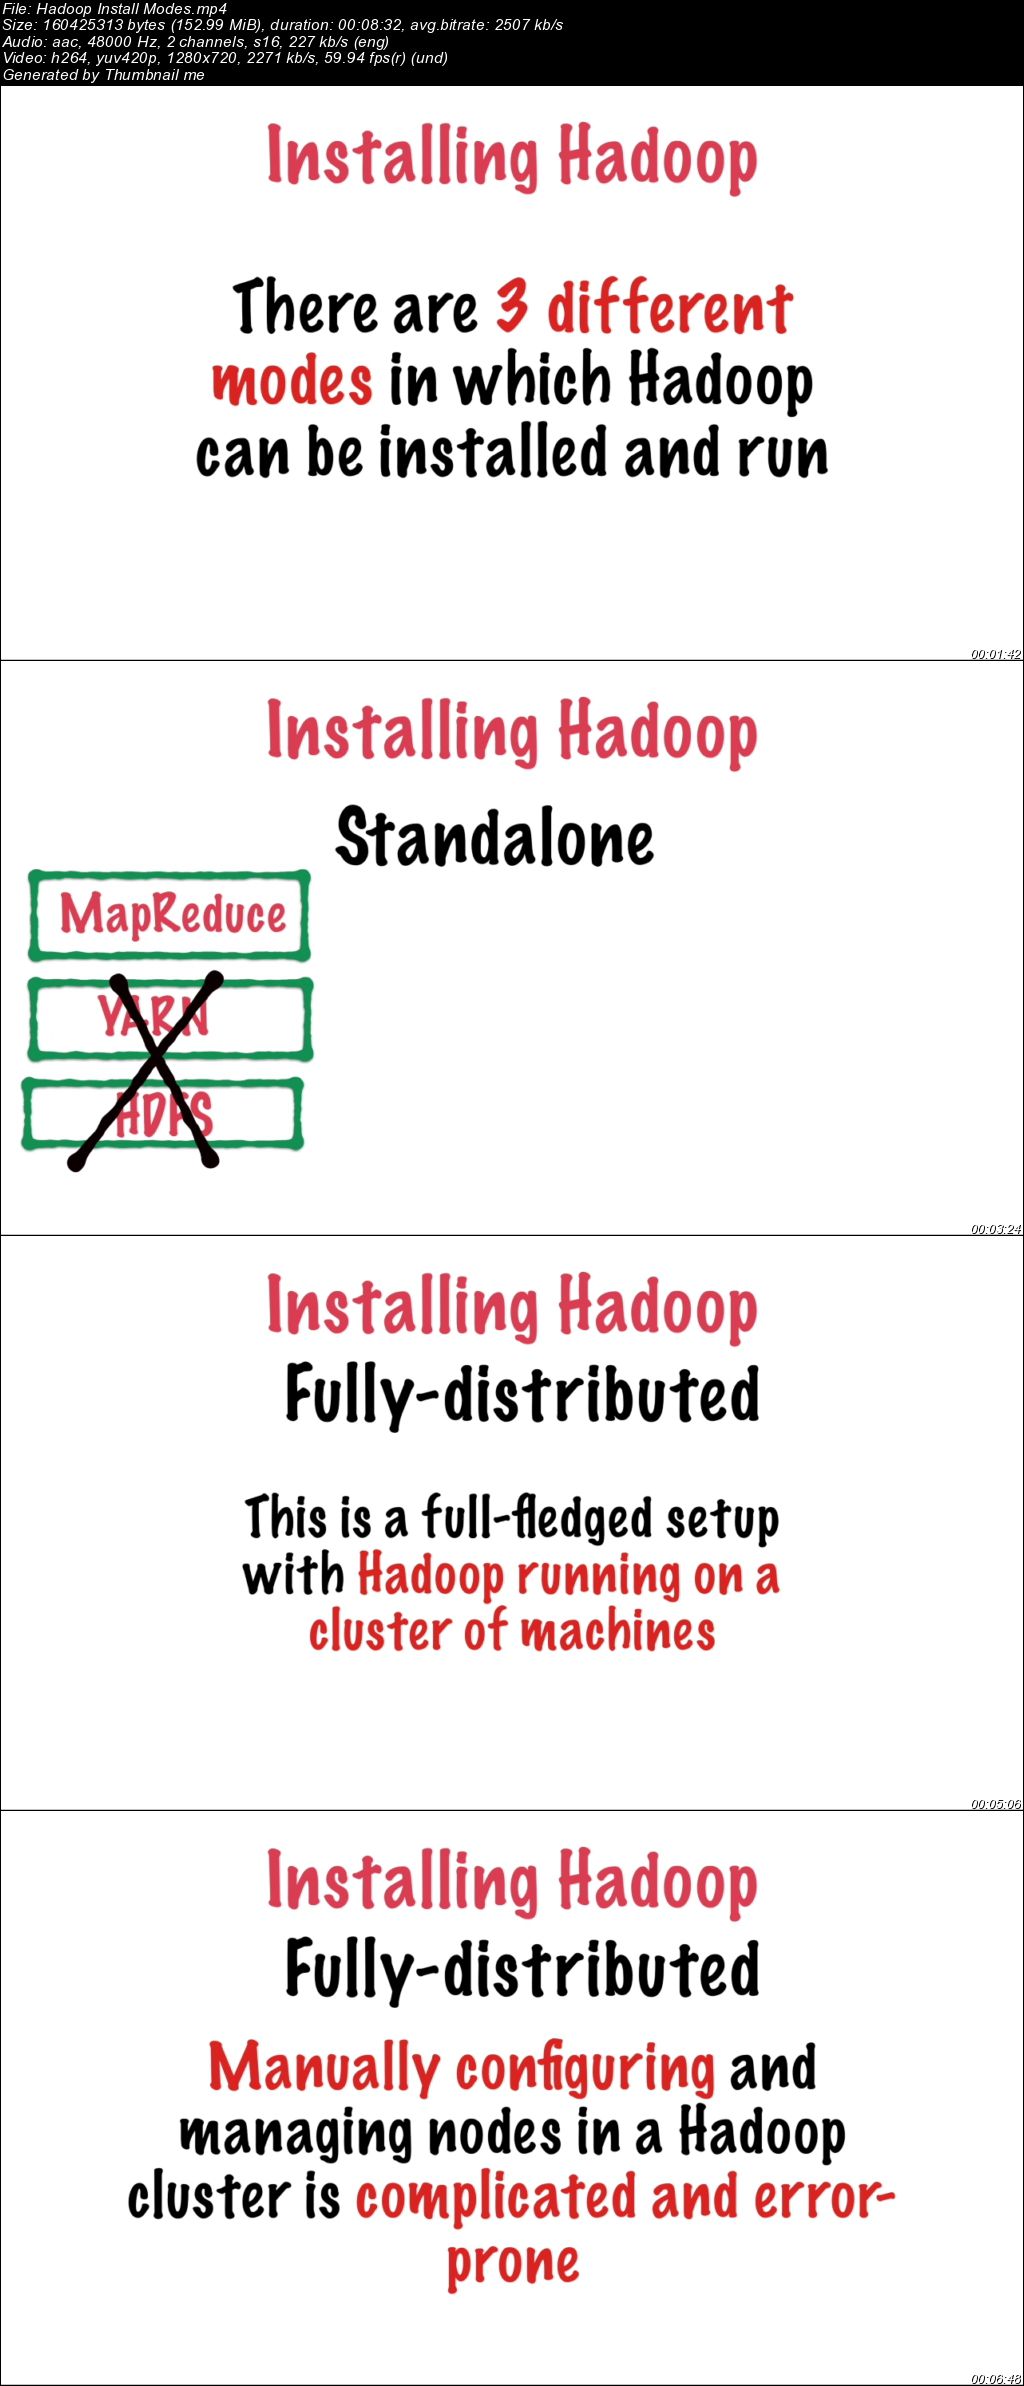 Learn By Example - Hadoop, MapReduce for Big Data problems